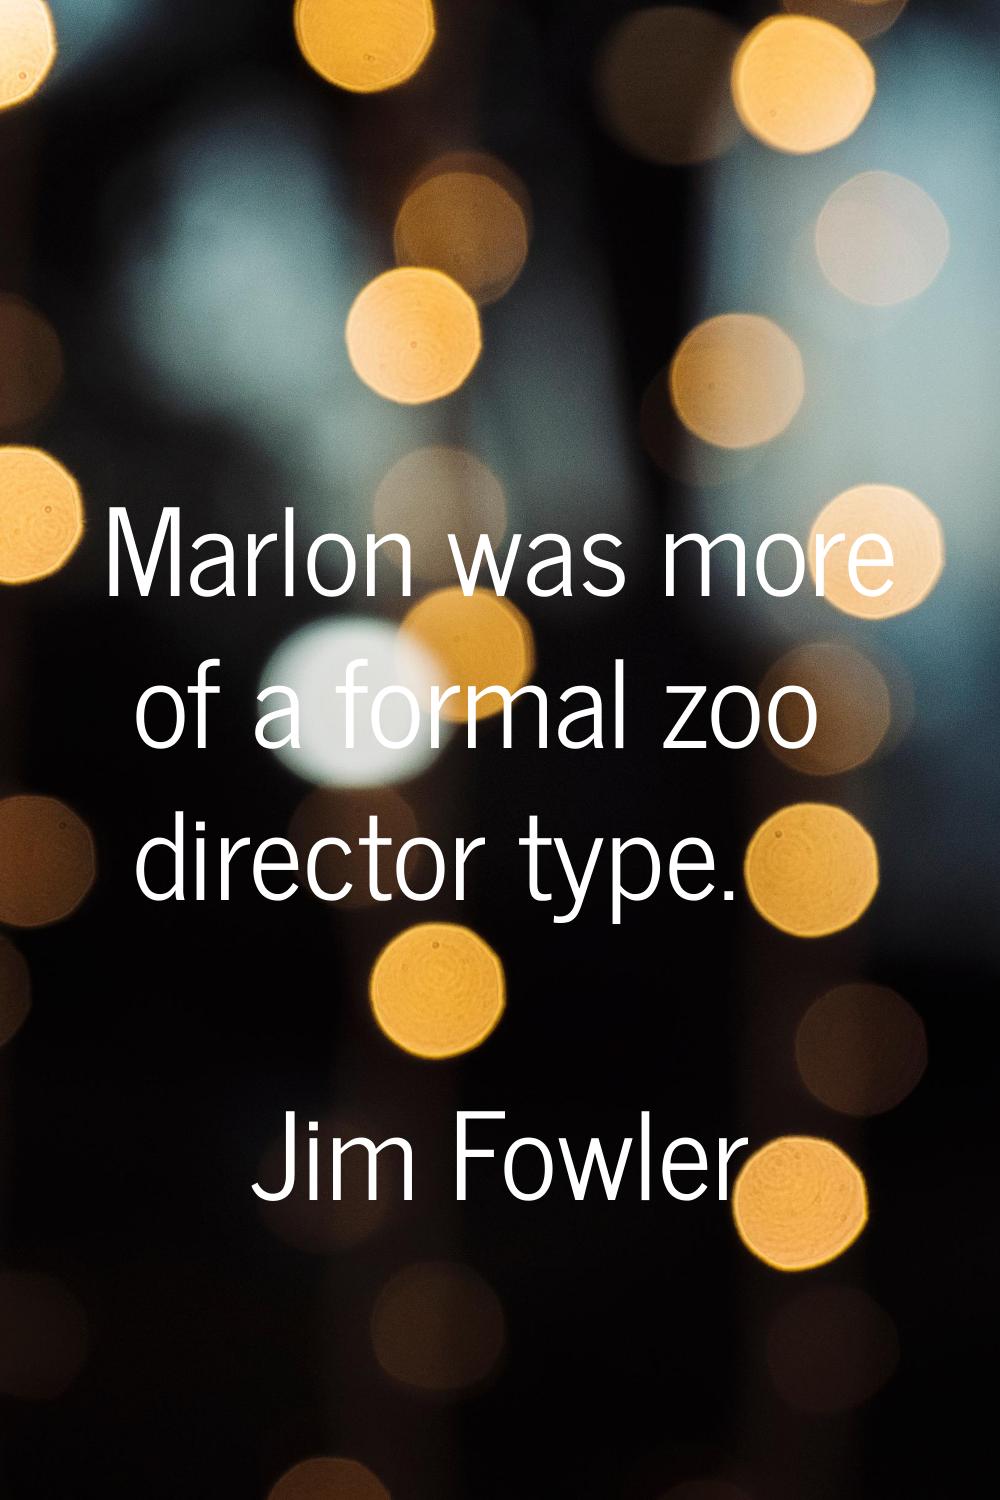 Marlon was more of a formal zoo director type.